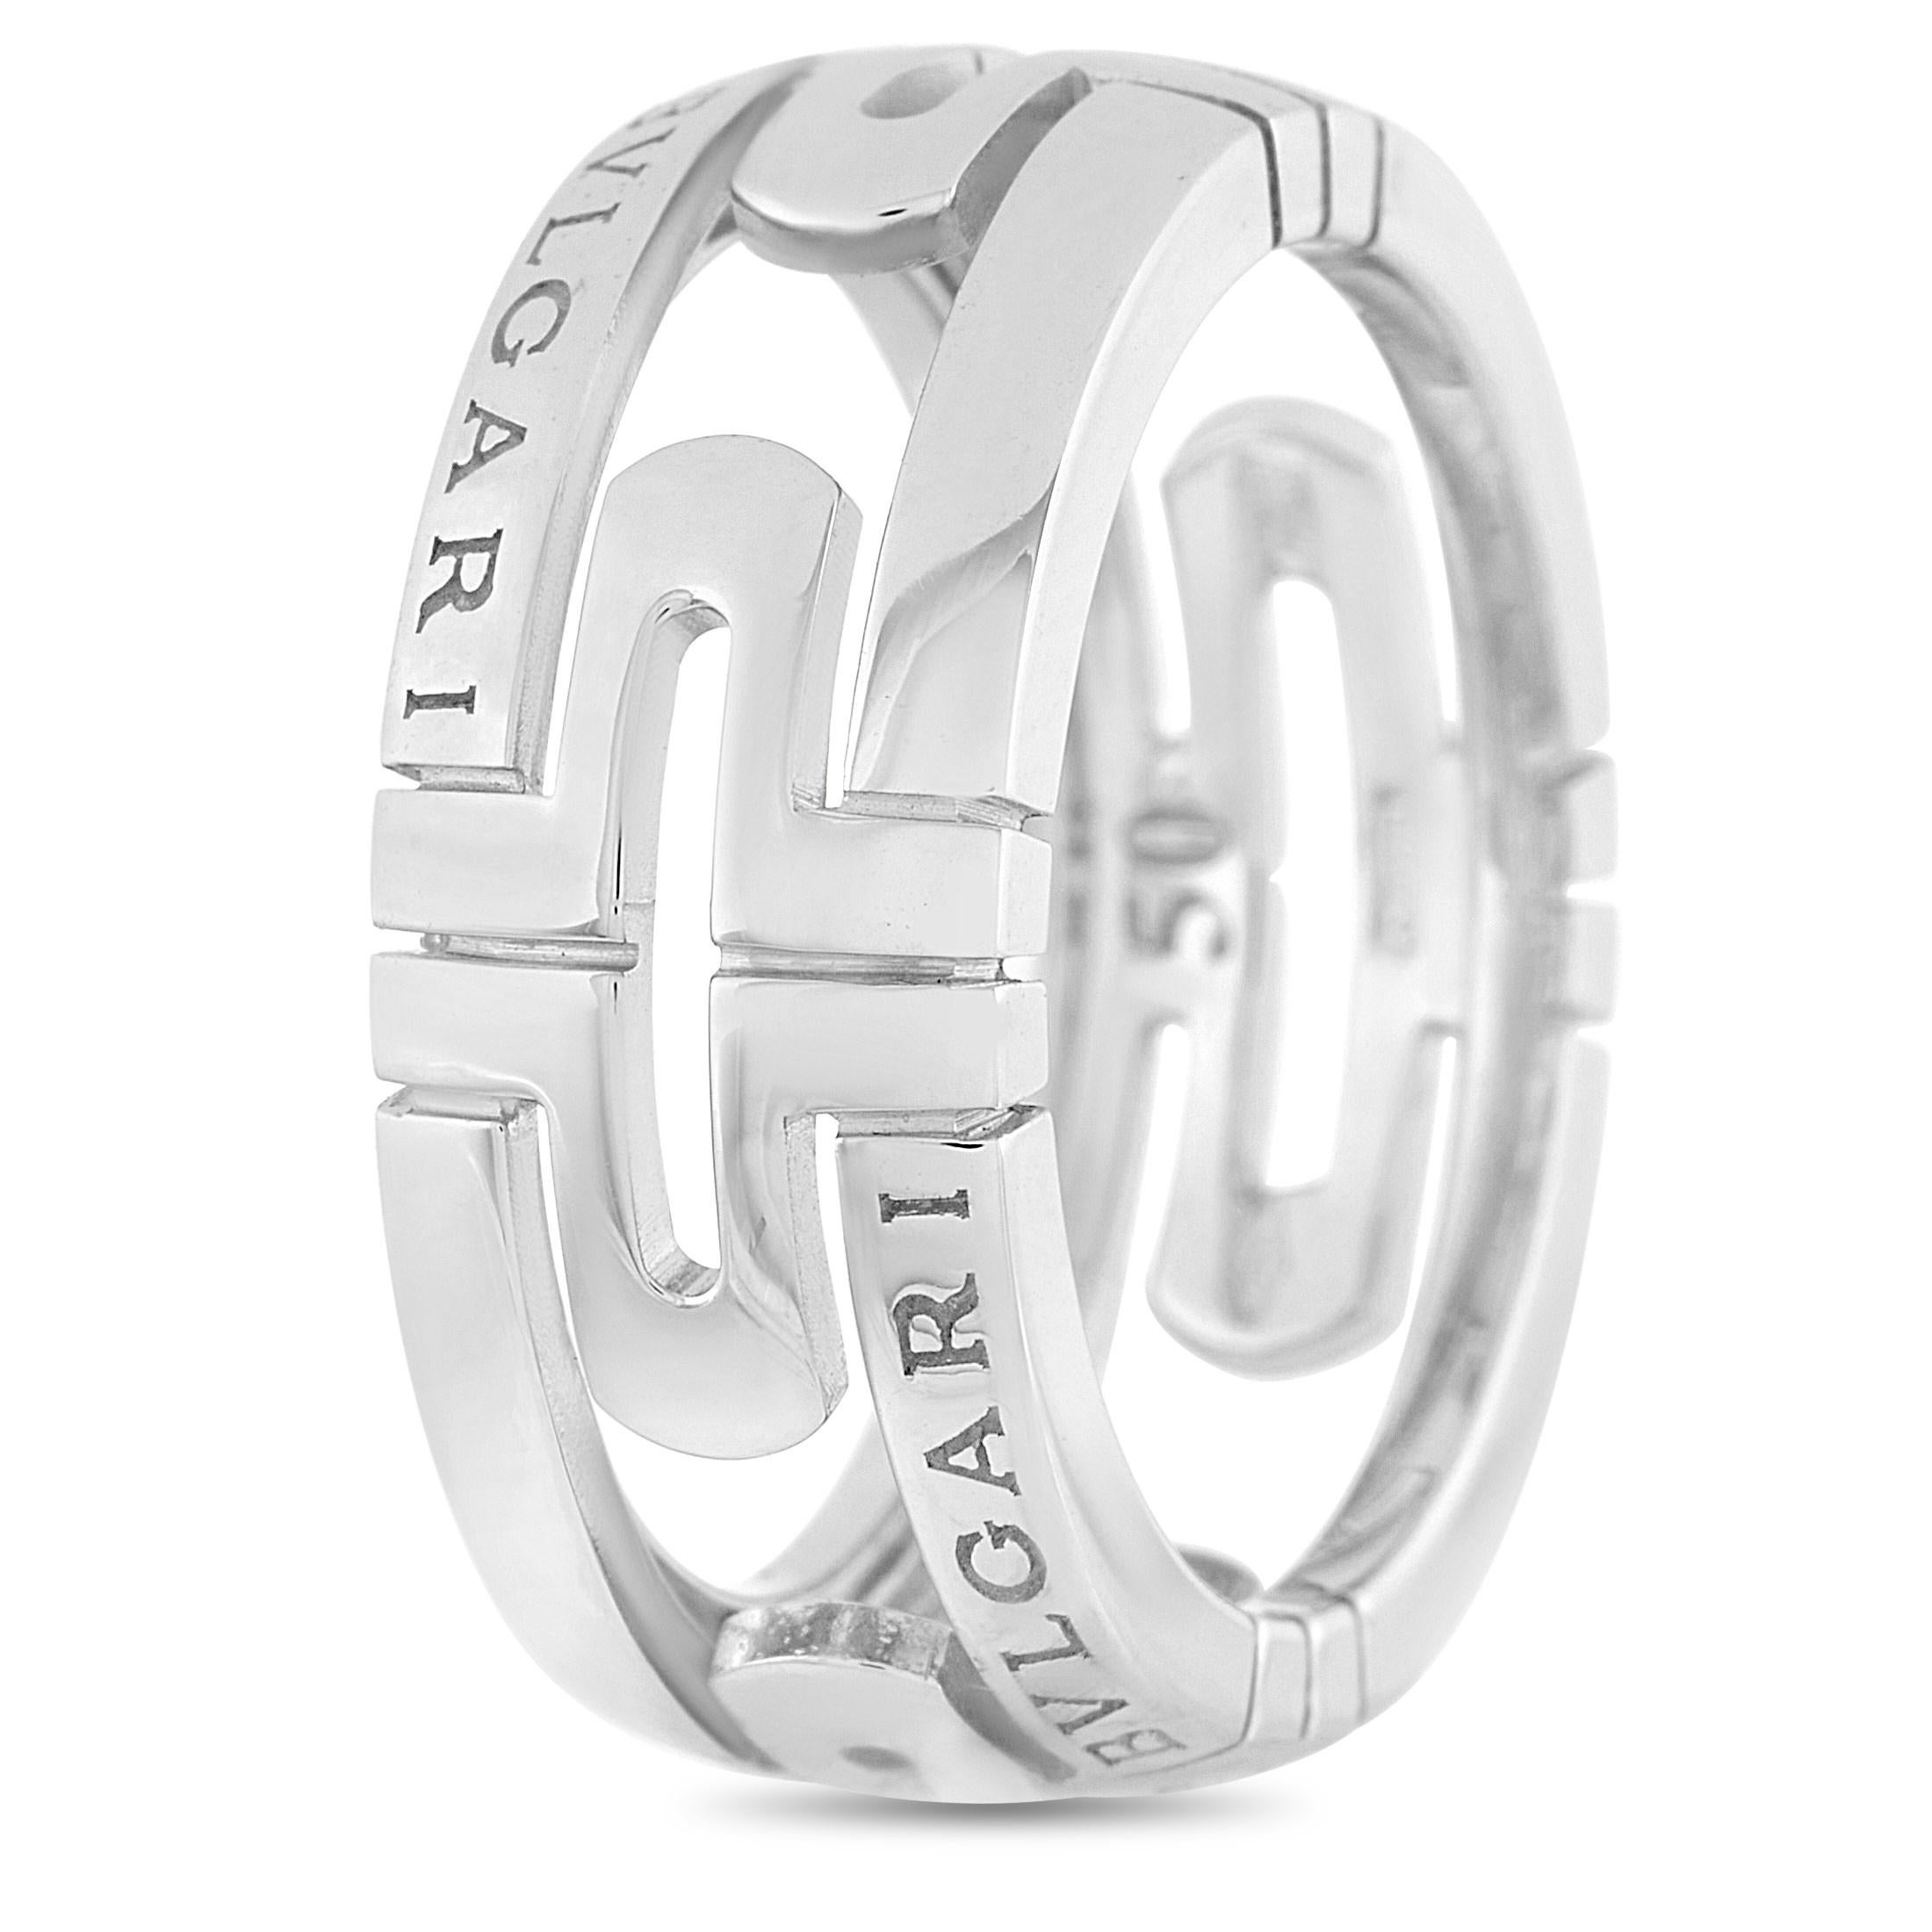 This unique Bvlgari Parentesi 18K White Gold Ring is made with 18K white gold and bears the Bvlgari brand name throughout the openwork band. The ring has a band thickness of 8 mm, and a total weight of 6.7 grams.

The ring is presented in estate